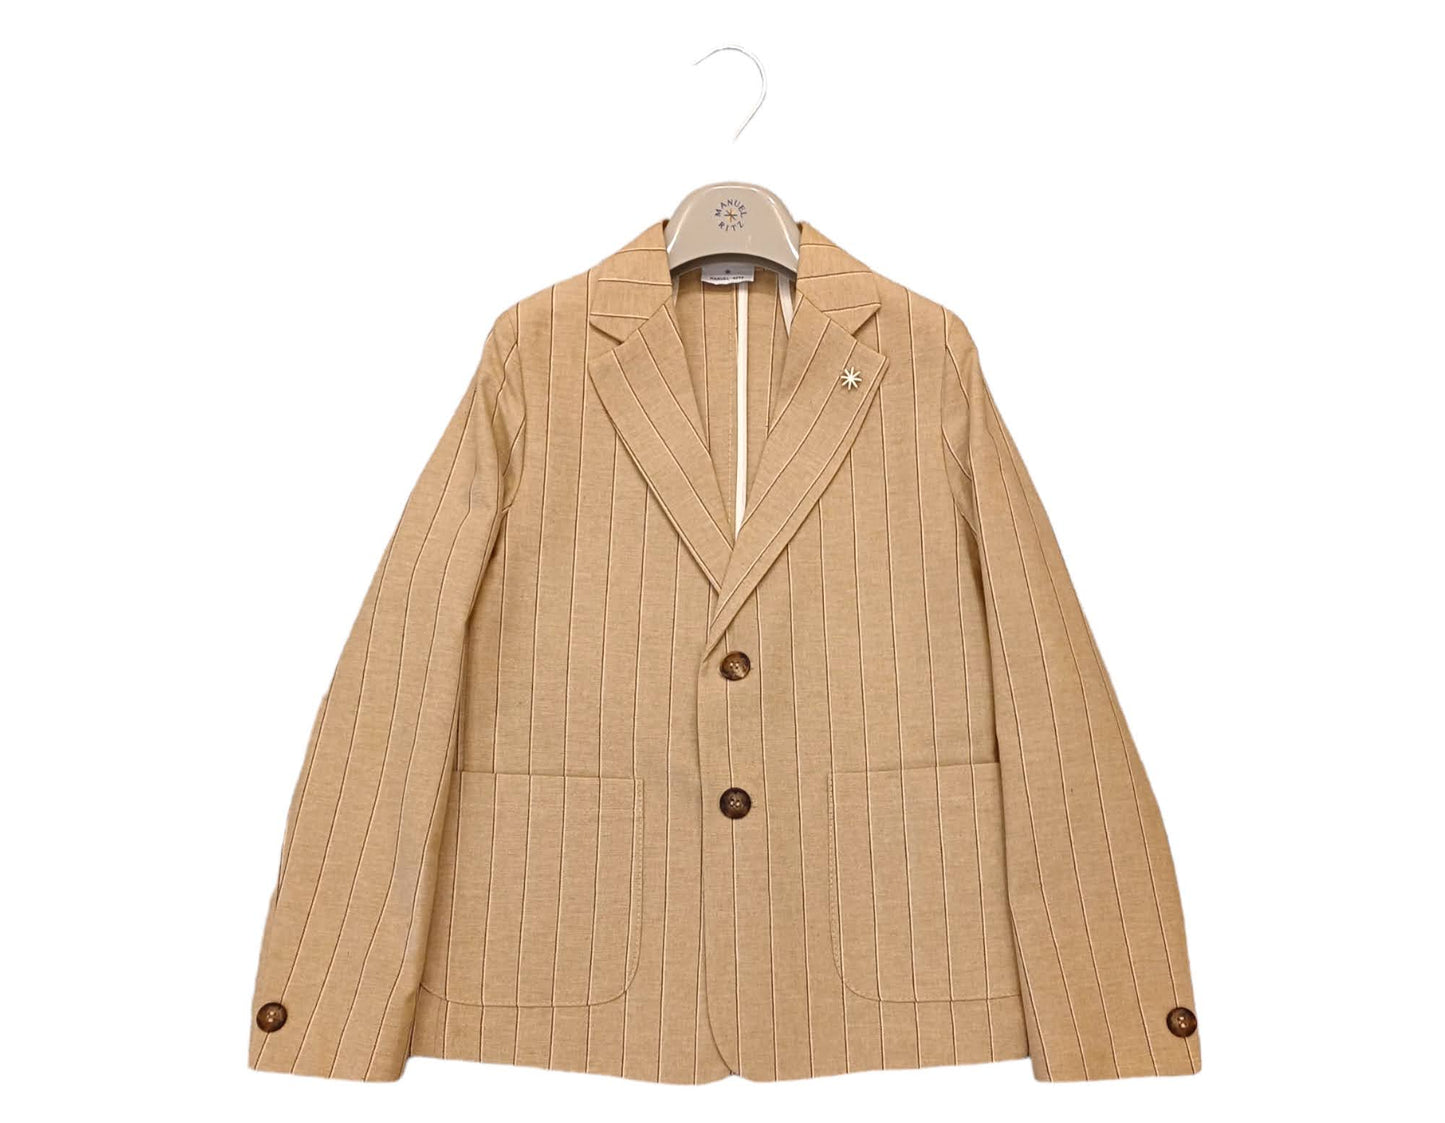 MANUEL RITZ Beige 2-piece suit with jacket and trousers